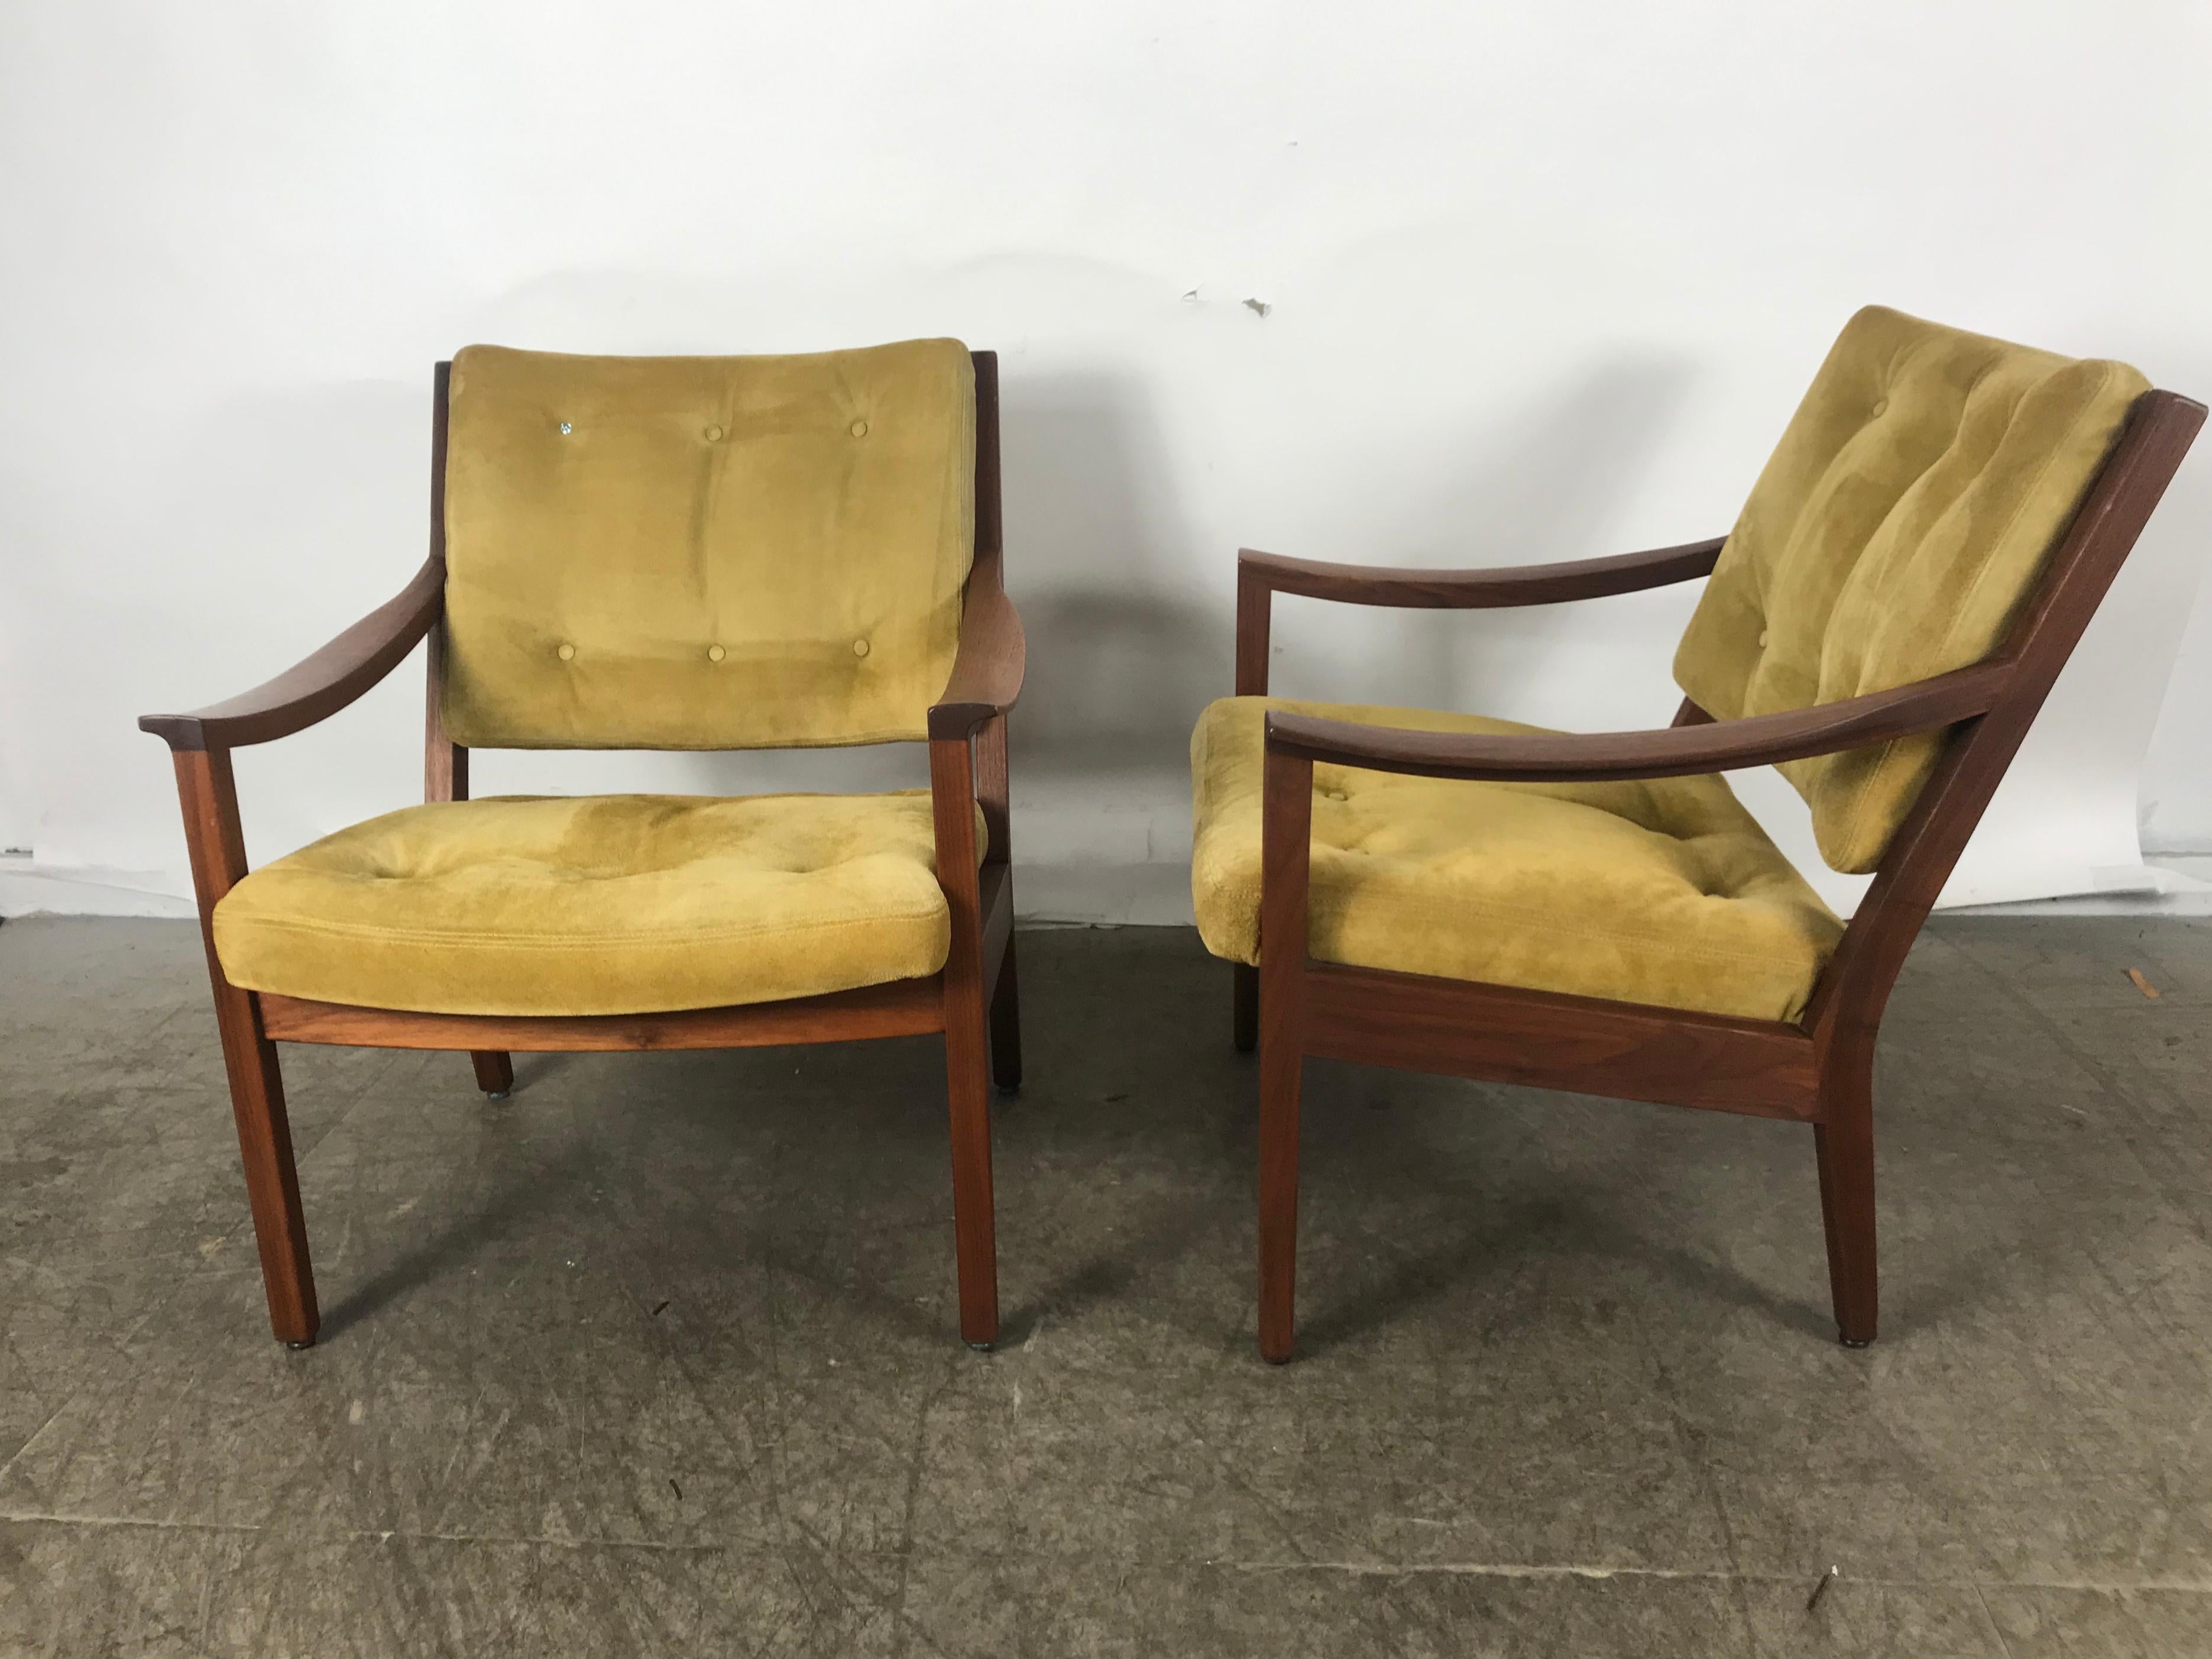 Stunning pair of modernist walnut and suede lounge chairs by Gunlocke. Superior quality and construction, beautiful warm solid walnut, wonderful patina, Classic midcentury styling, extremely comfortable, generous wide and deep seat, retains original